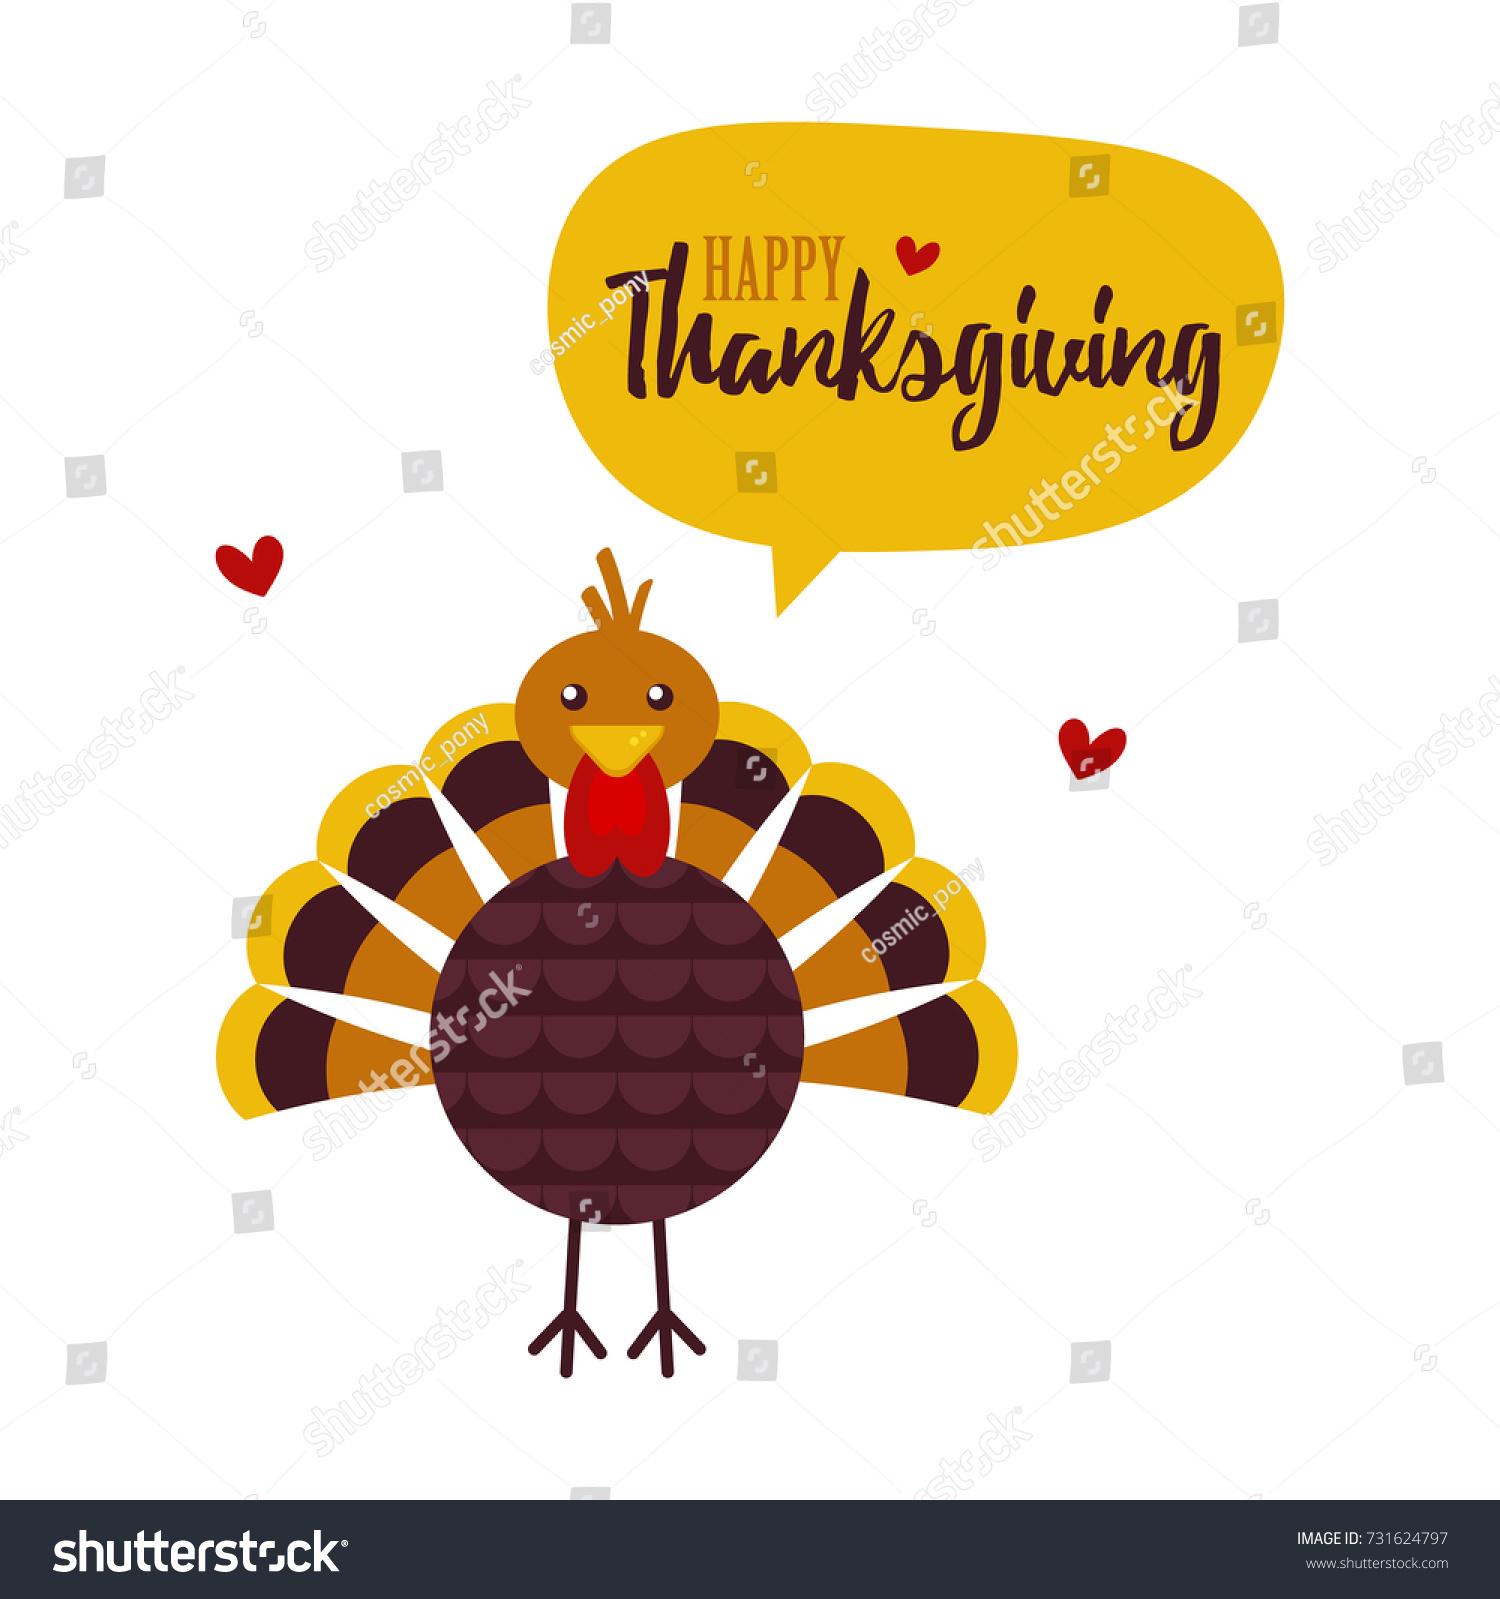 Free download Cute Cartoon Turkey Character Happy Thanksgiving Stock ...